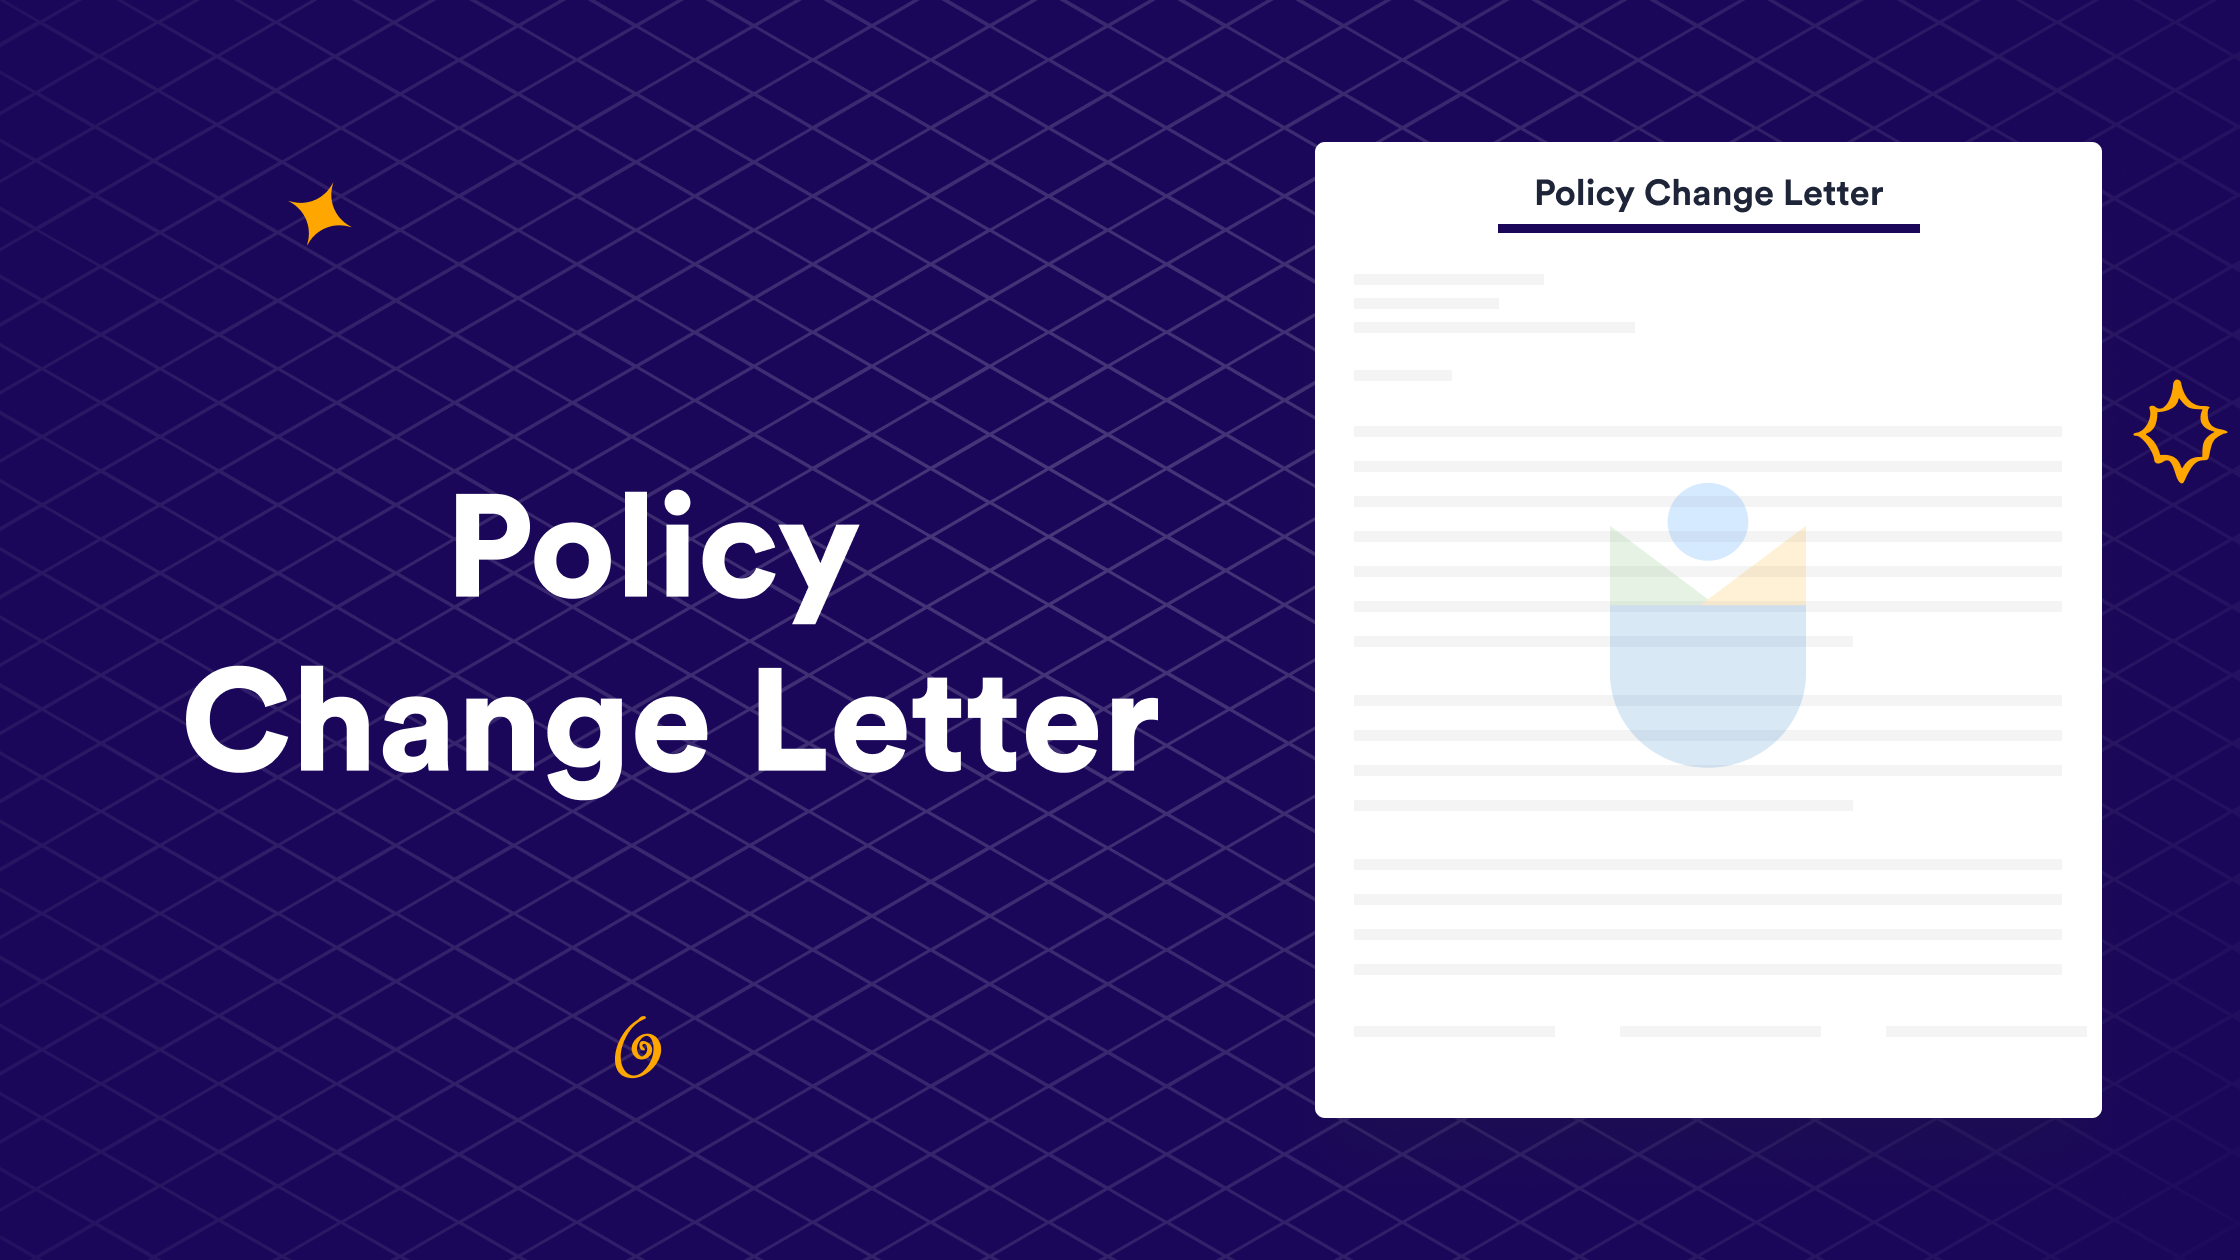 Policy Change Letter